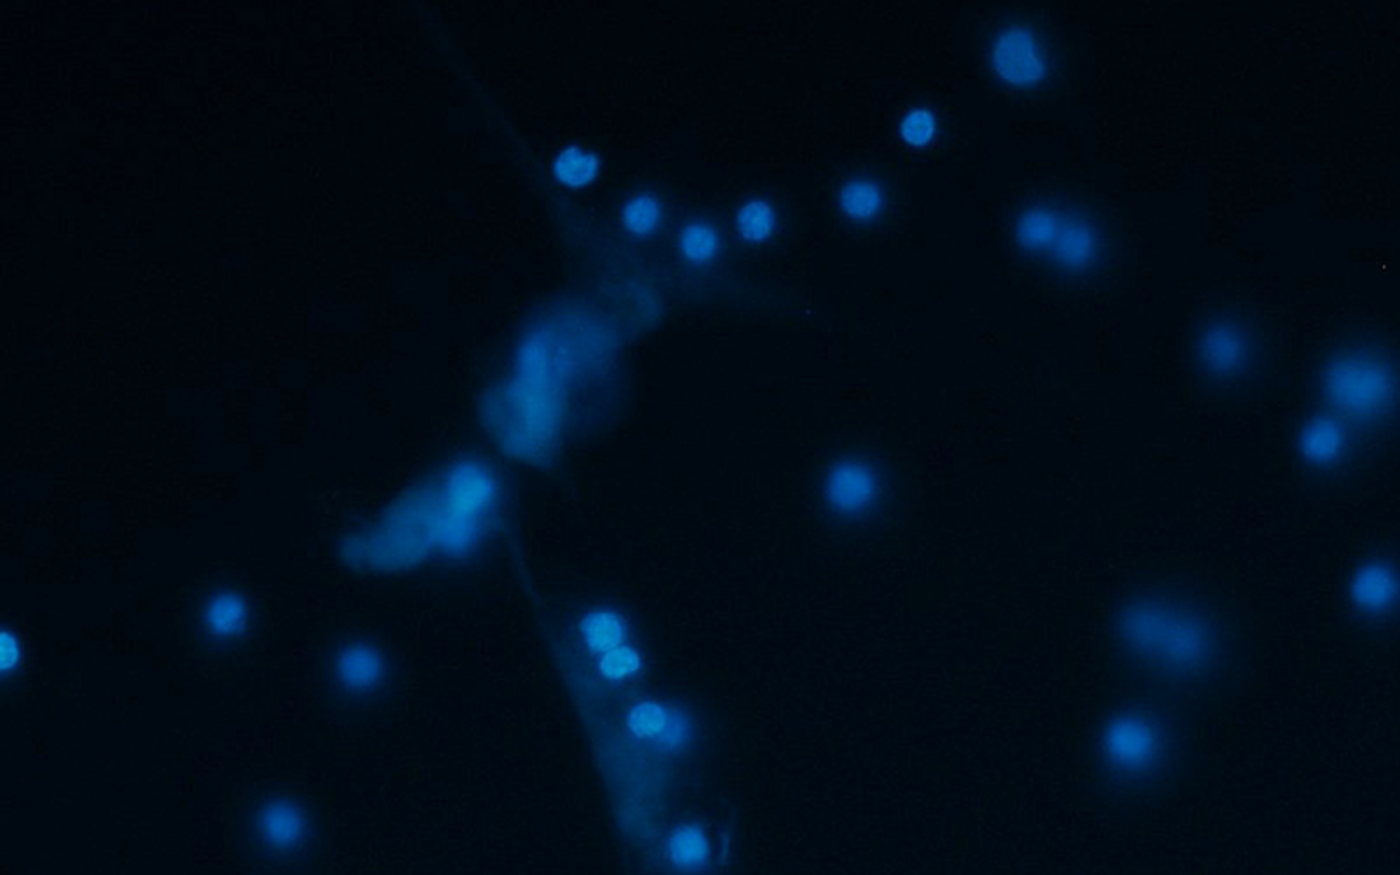 Fluorescent image of cultivated neutrophils isolated from venous blood of human with Alzheimer Disease. Credit: Wikimedia user Ltumanovskaya